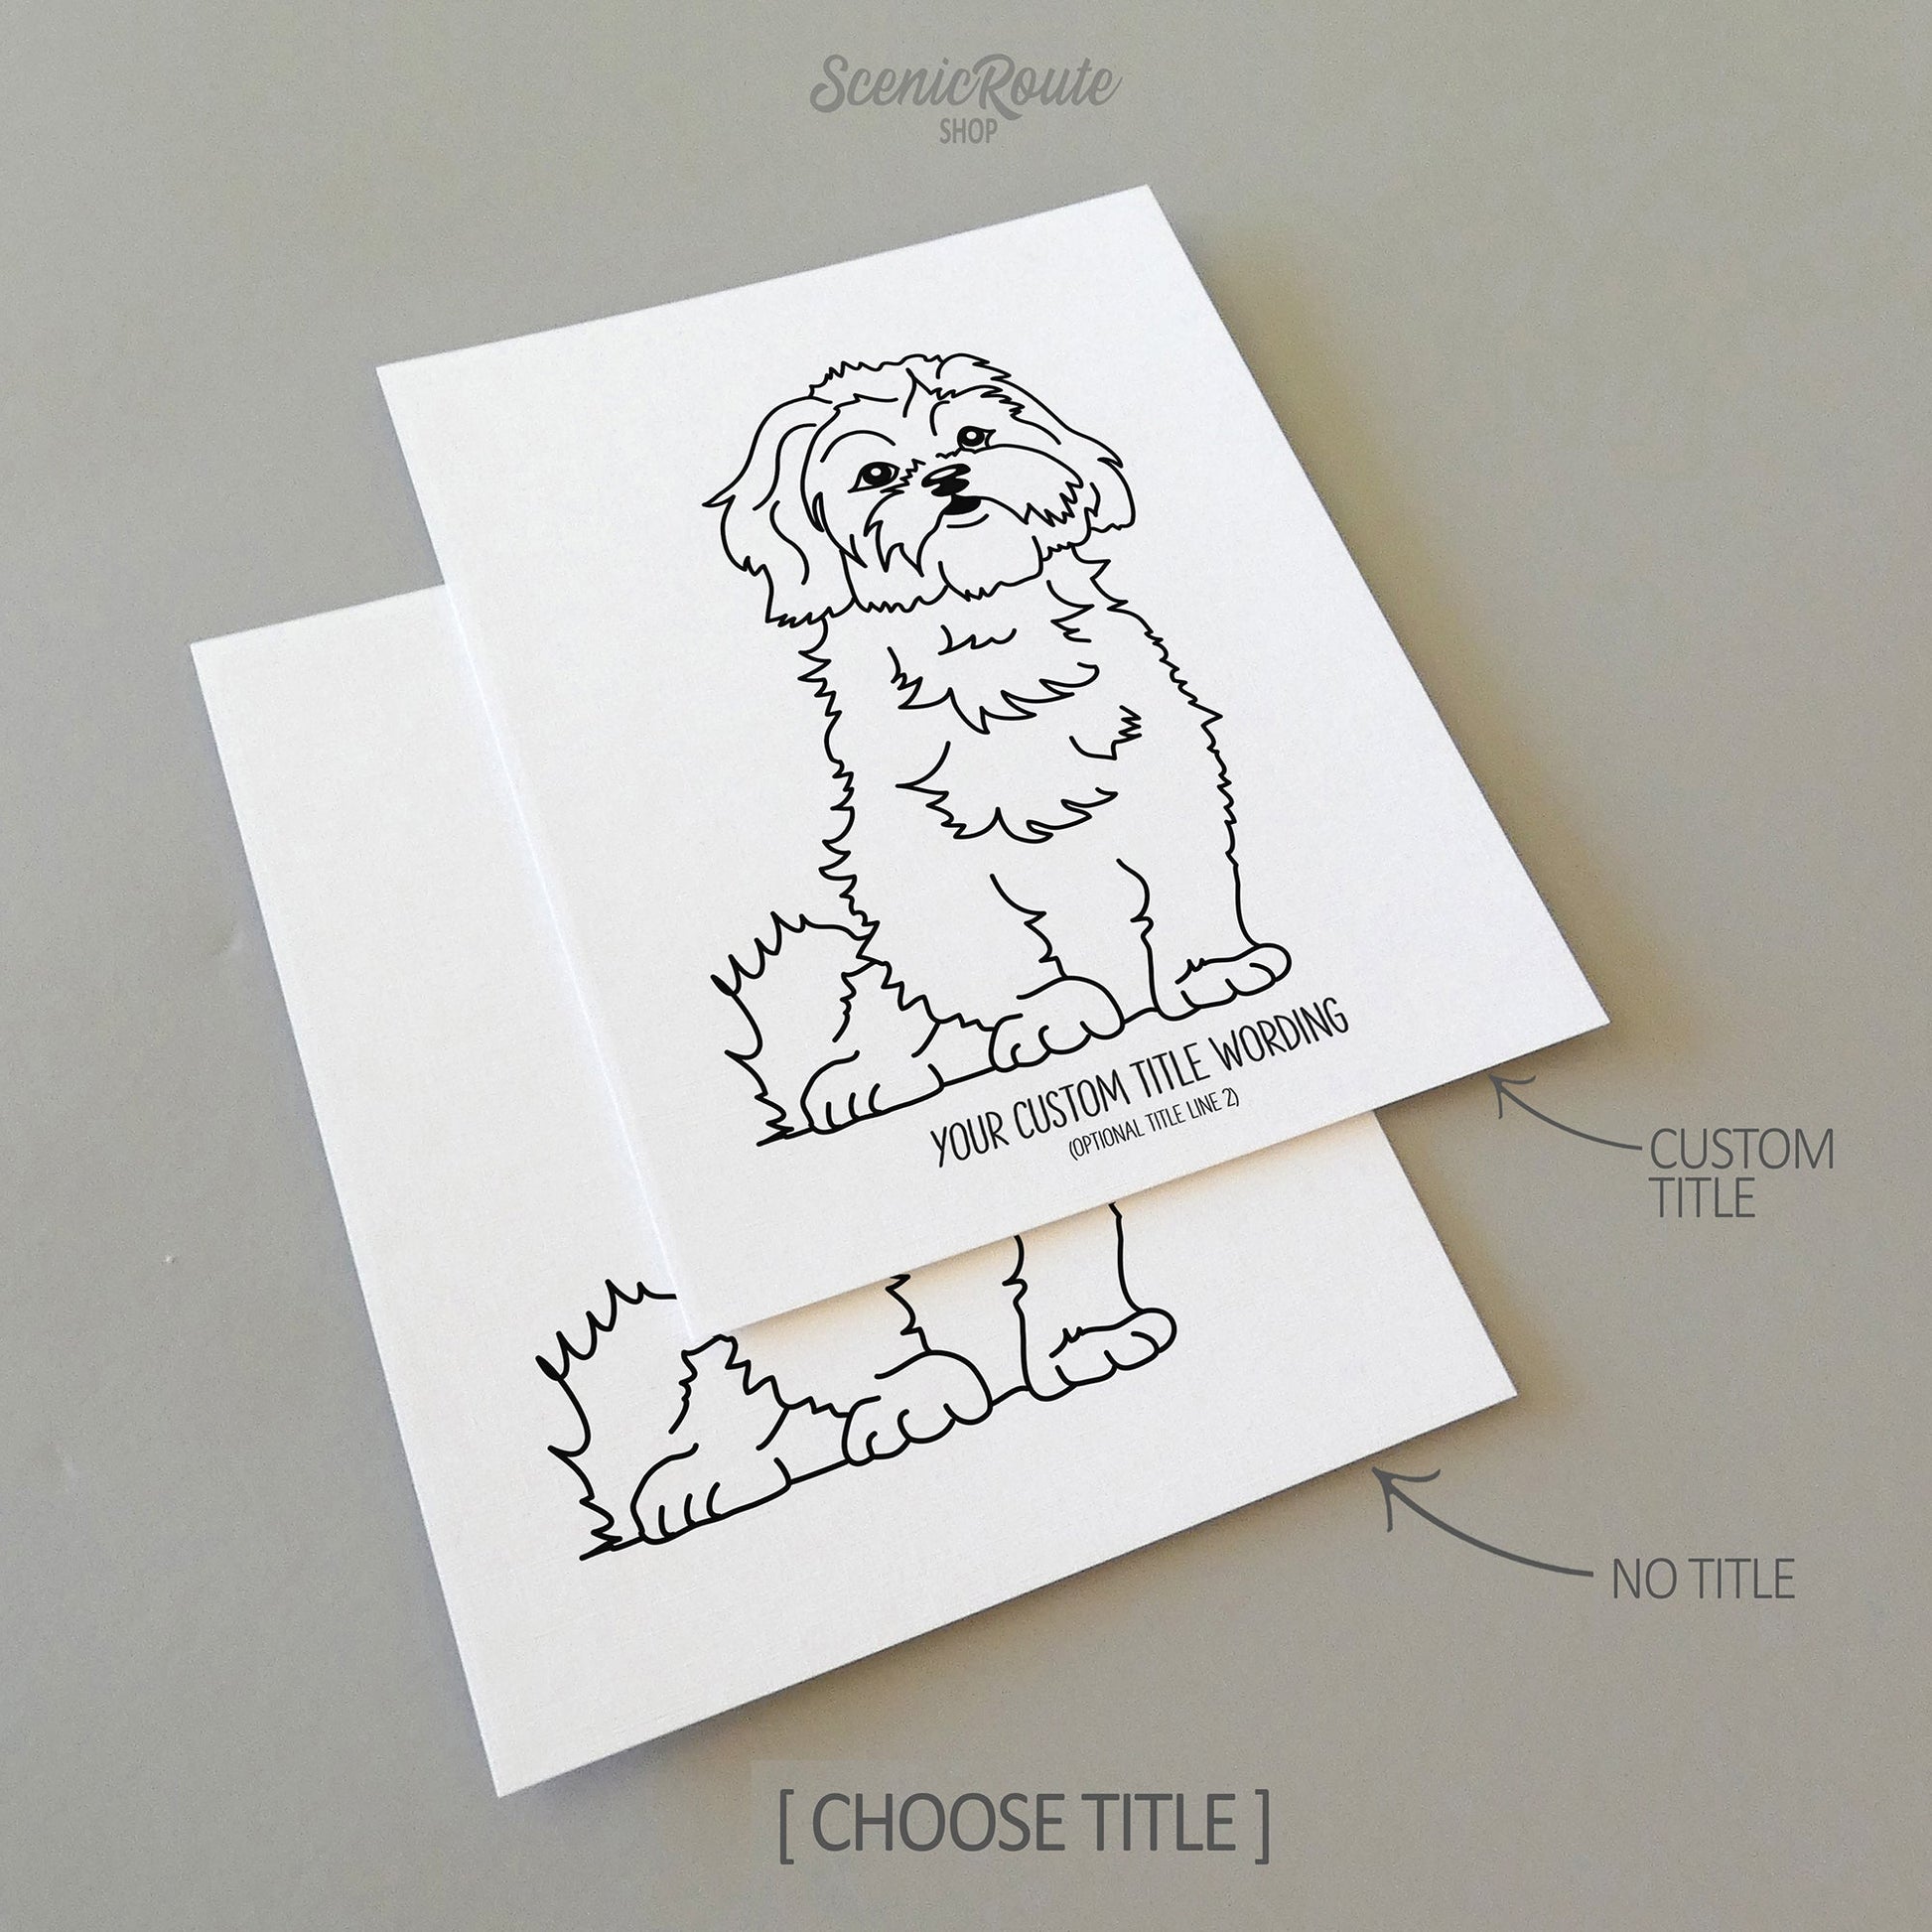 Two line art drawings of a Shih Tzu dog on white linen paper with a gray background.  The pieces are shown with “No Title” and “Custom Title” options for the available art print options.